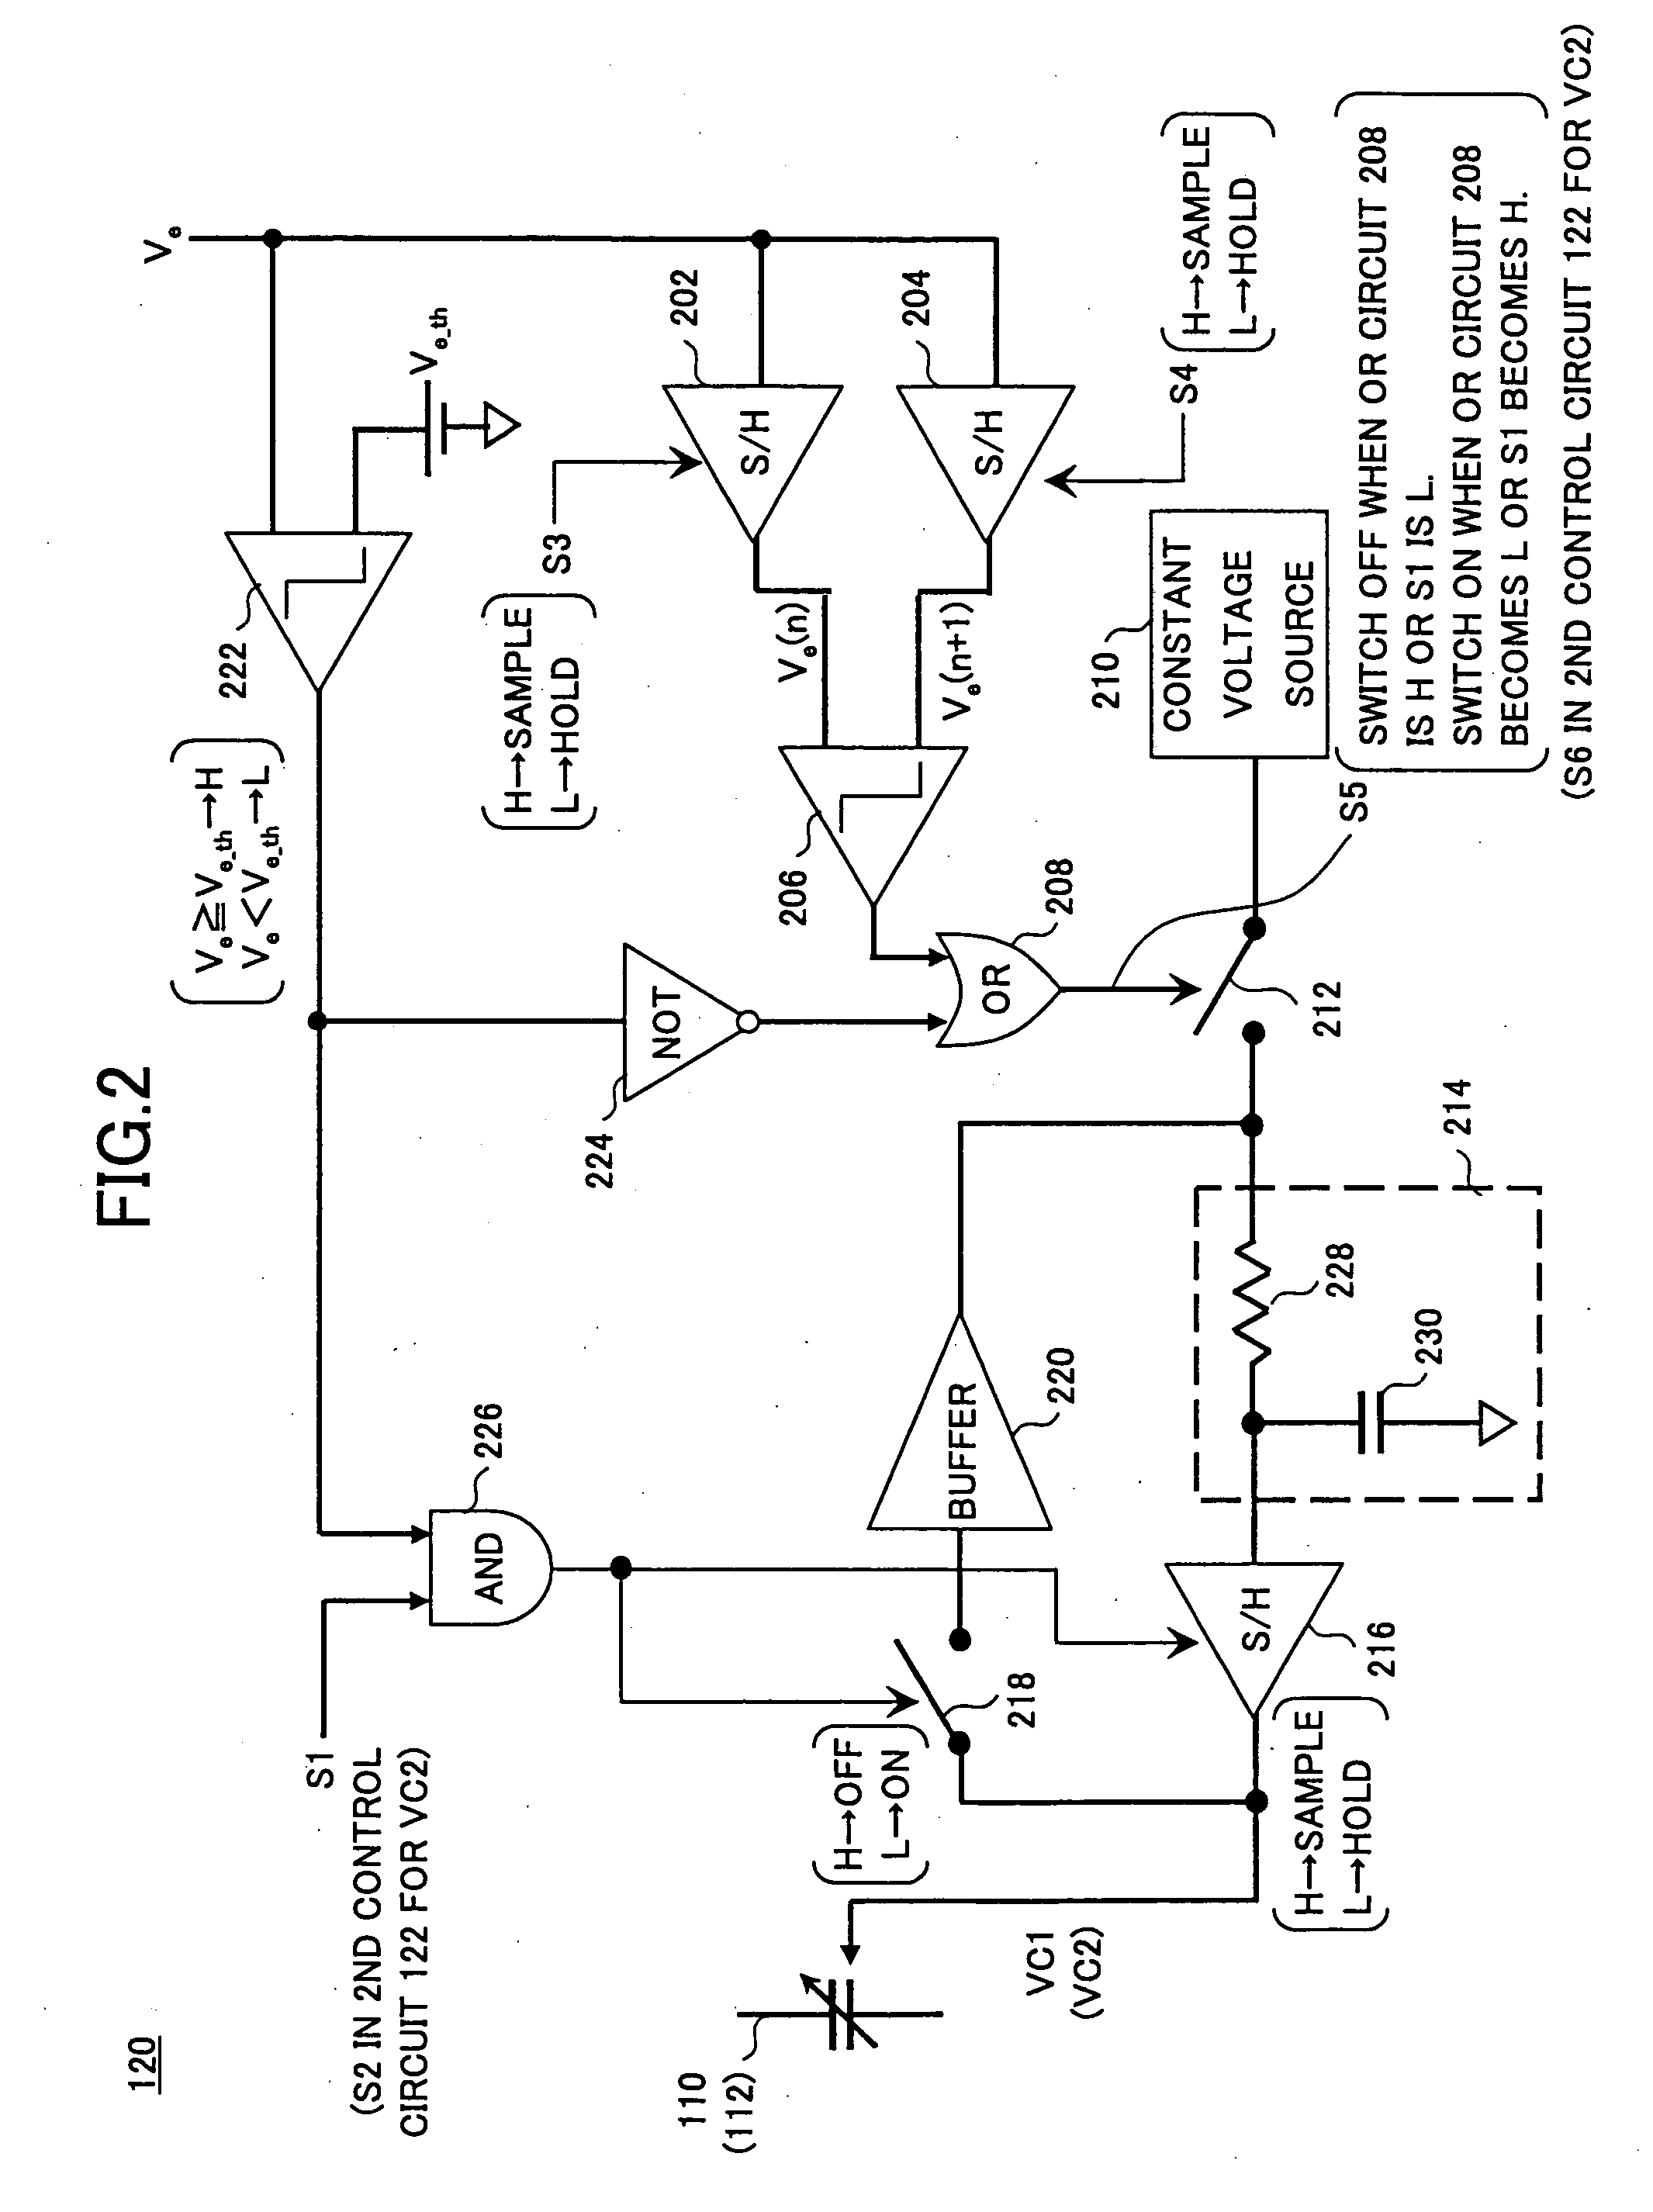 Control device for antenna matching circuit